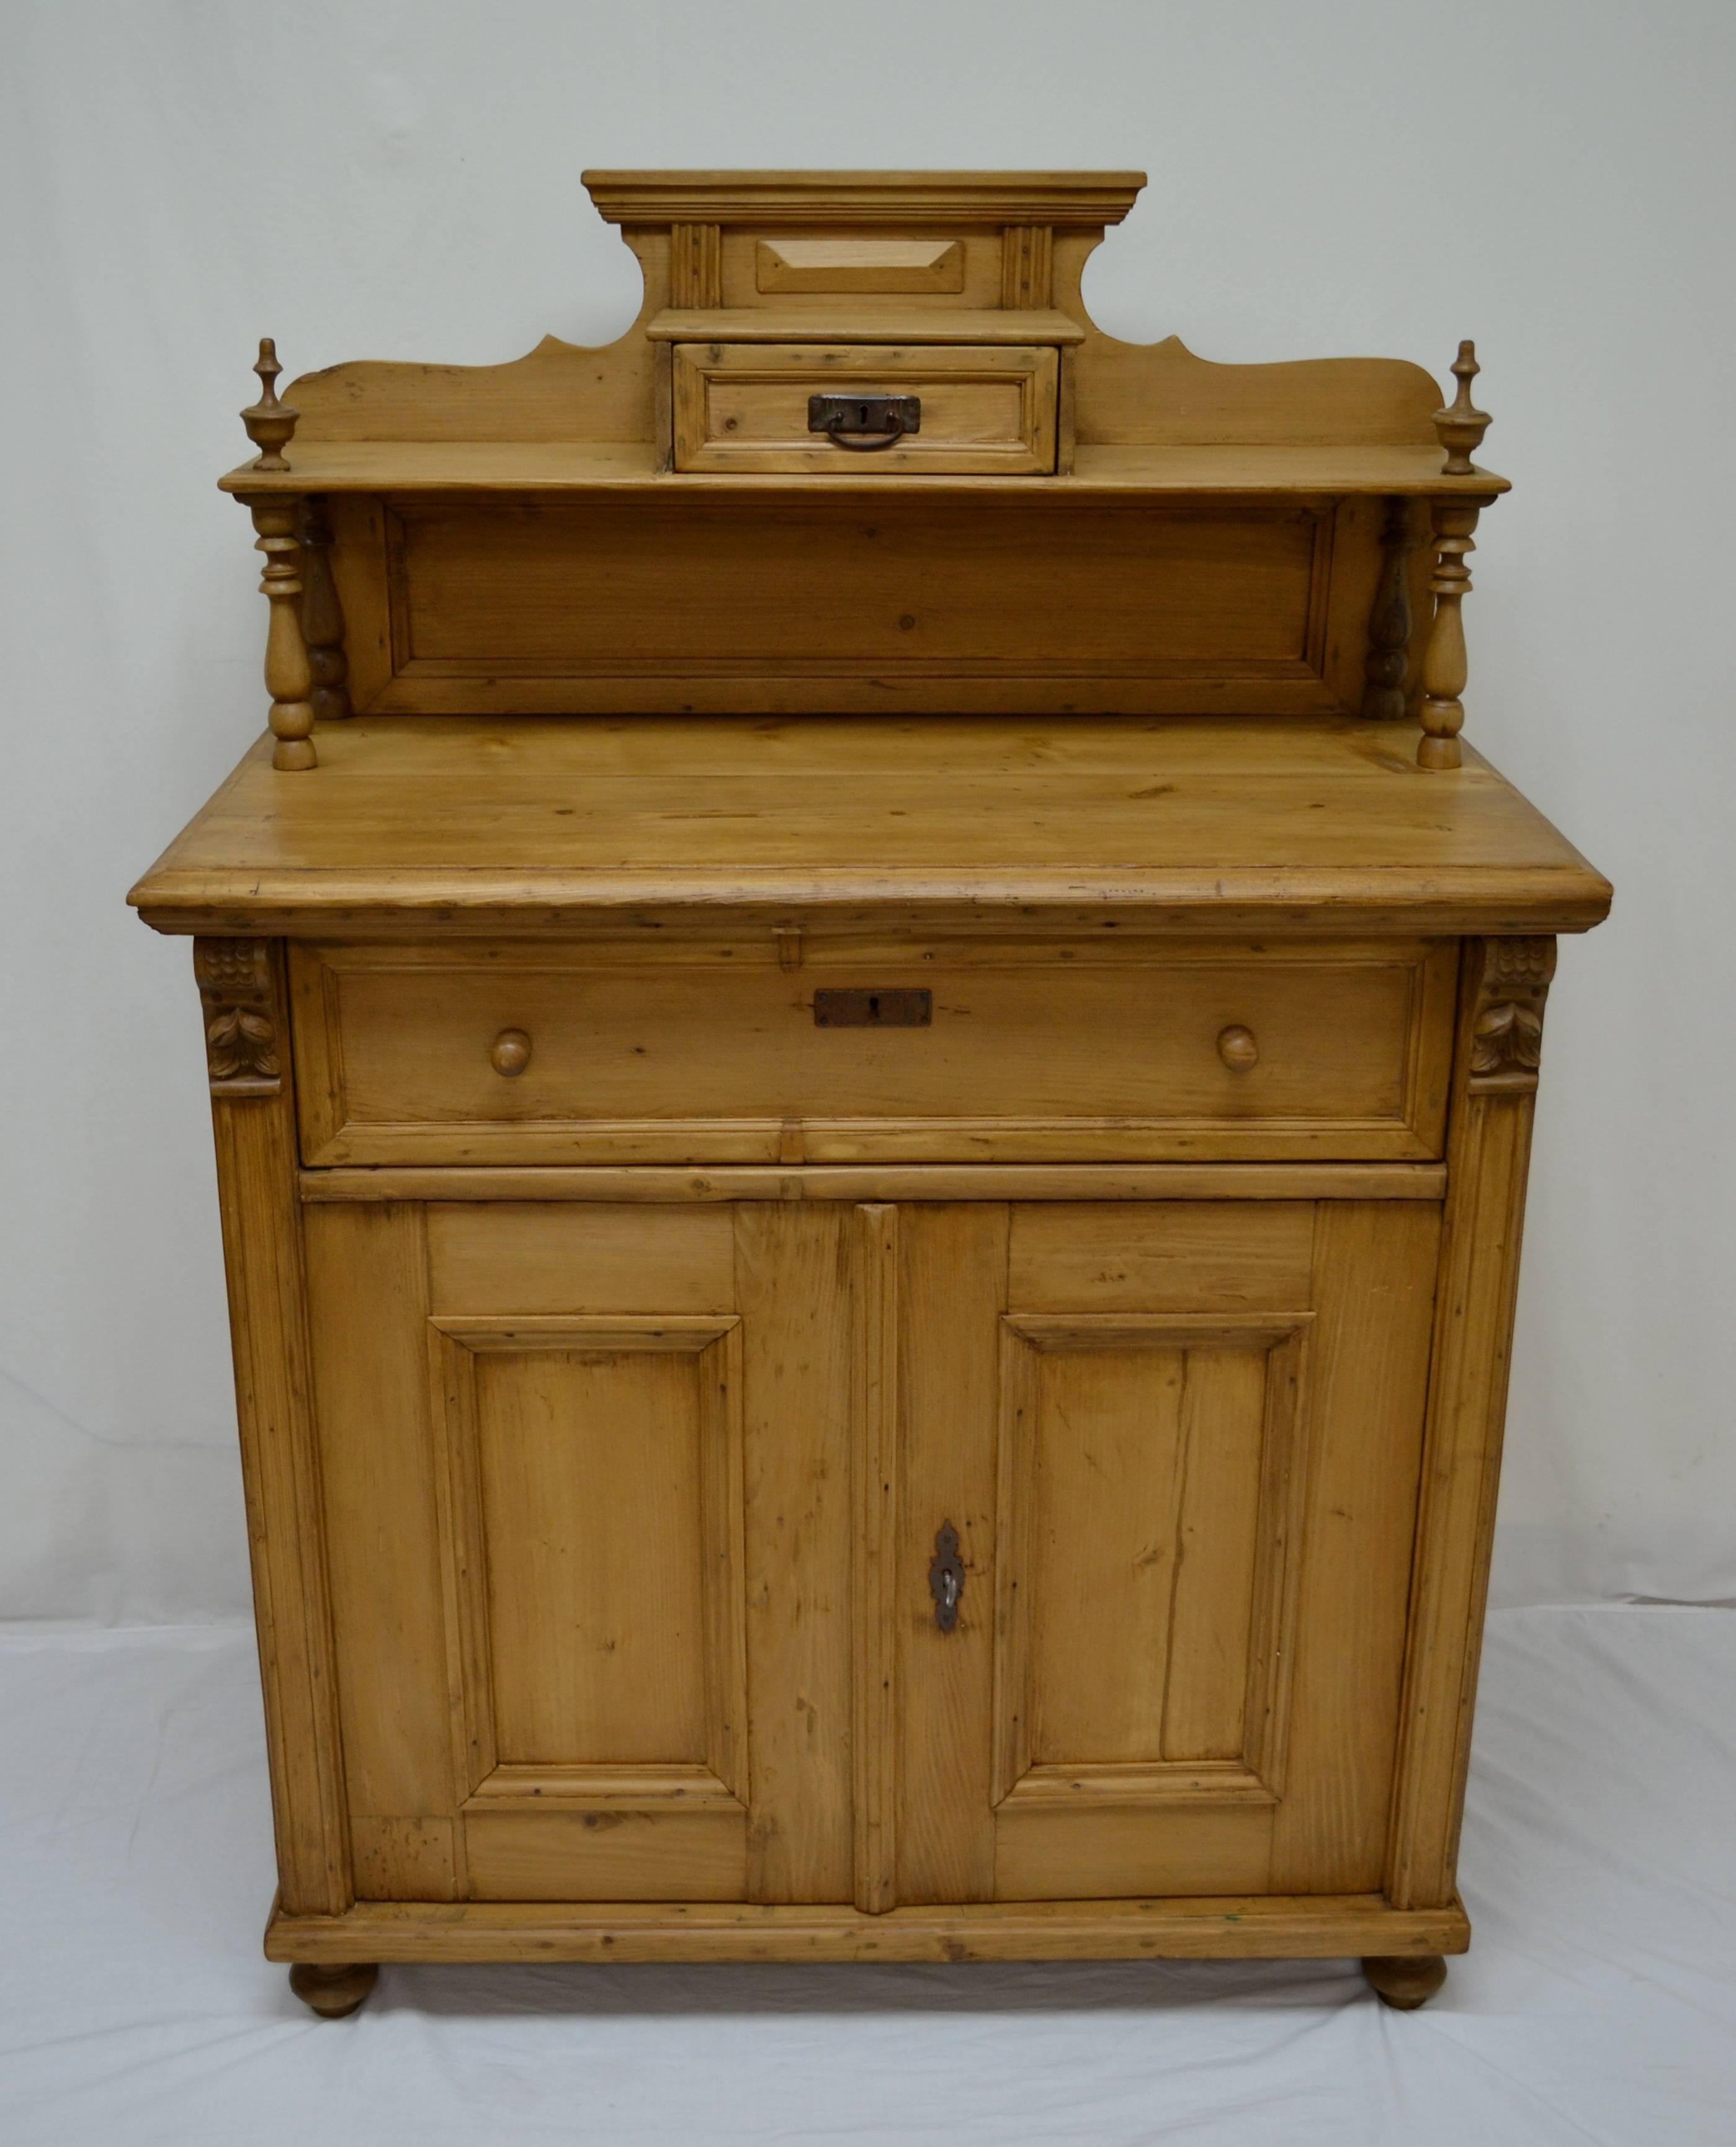 This is a most attractive pine chiffonier with beautiful proportions. The upper gallery features crown molding above a small hand-cut dovetailed drawer which sits on a shelf supported by a back panel and full turned hardwood balusters, topped with